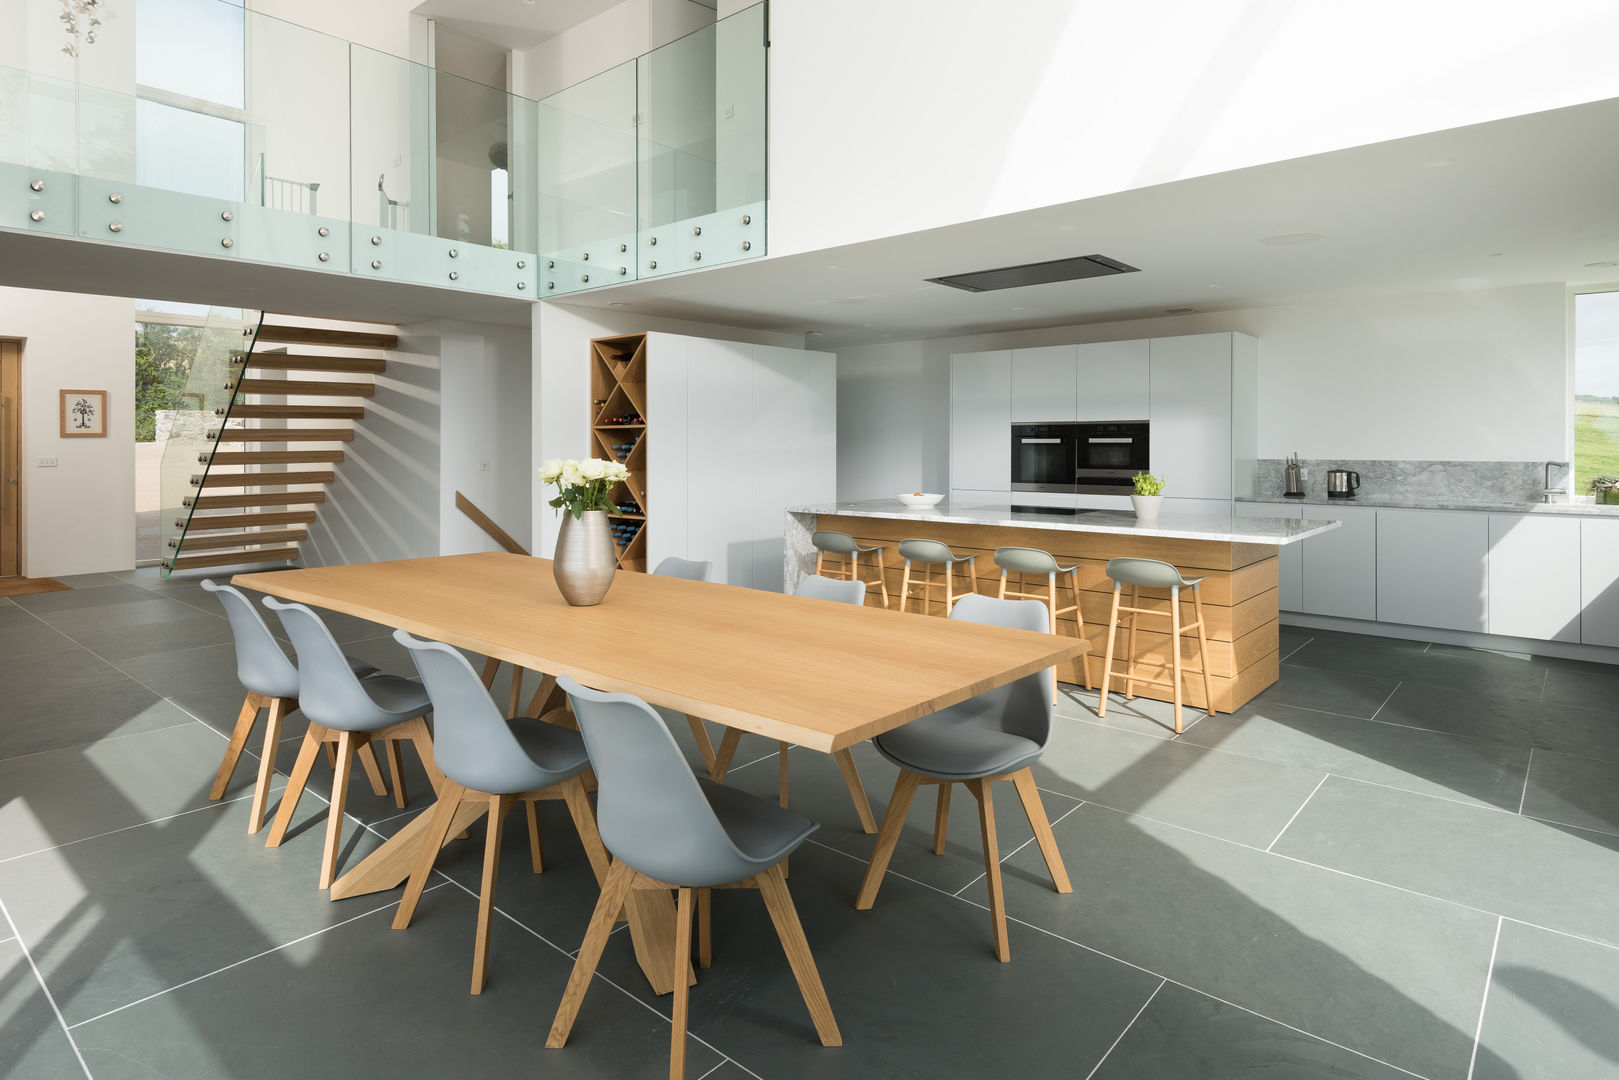 Contemporary Replacement Dwelling, Cubert, Laurence Associates Laurence Associates Modern Yemek Odası kitchen,dining room,open plan,open space kitchen,dining table,dining chairs,mezzanine,stairs,white kitchen,flooring,modern,contemporary